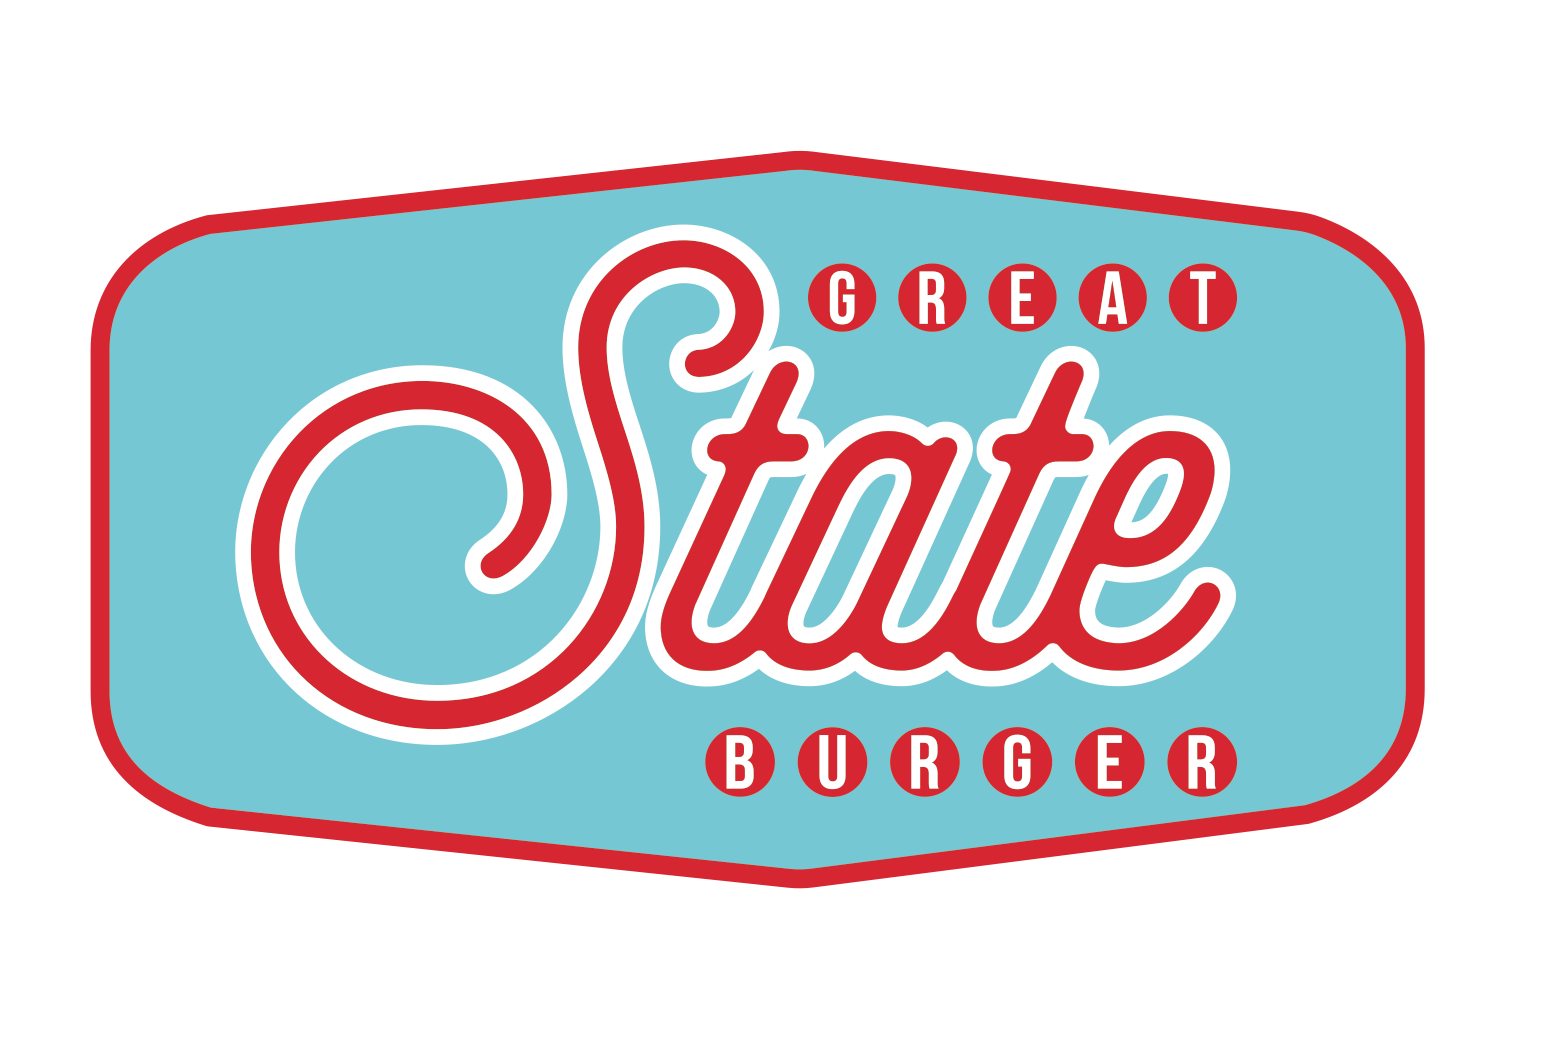 Great State Burger will open in Ravenna and South Lake Union this fall